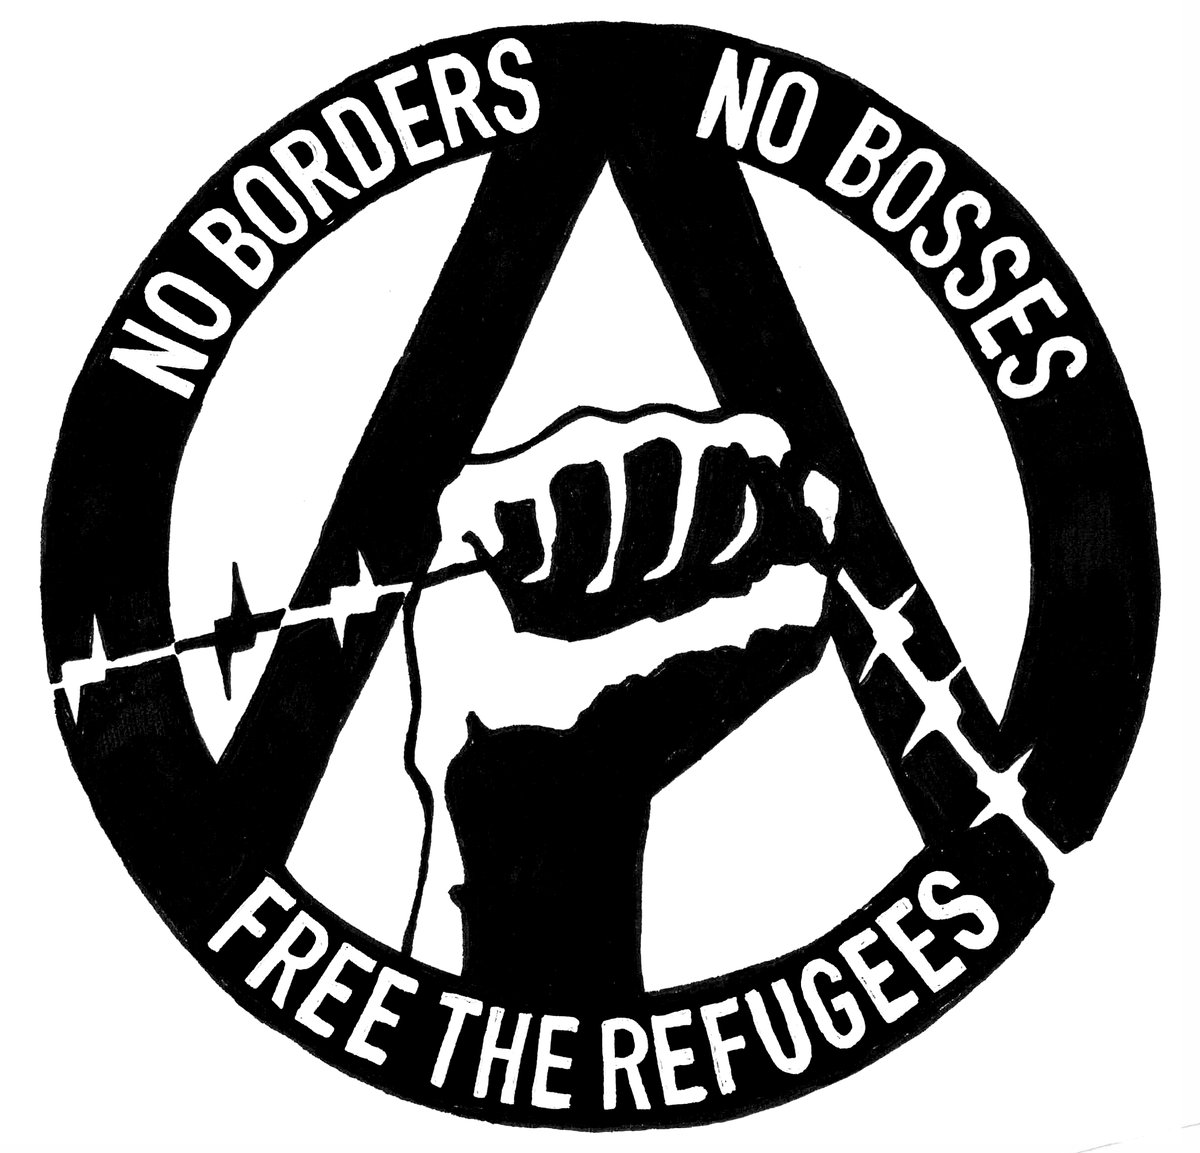 Image of "No Borders No Bosses Free the Refugees" sticker, 10pk